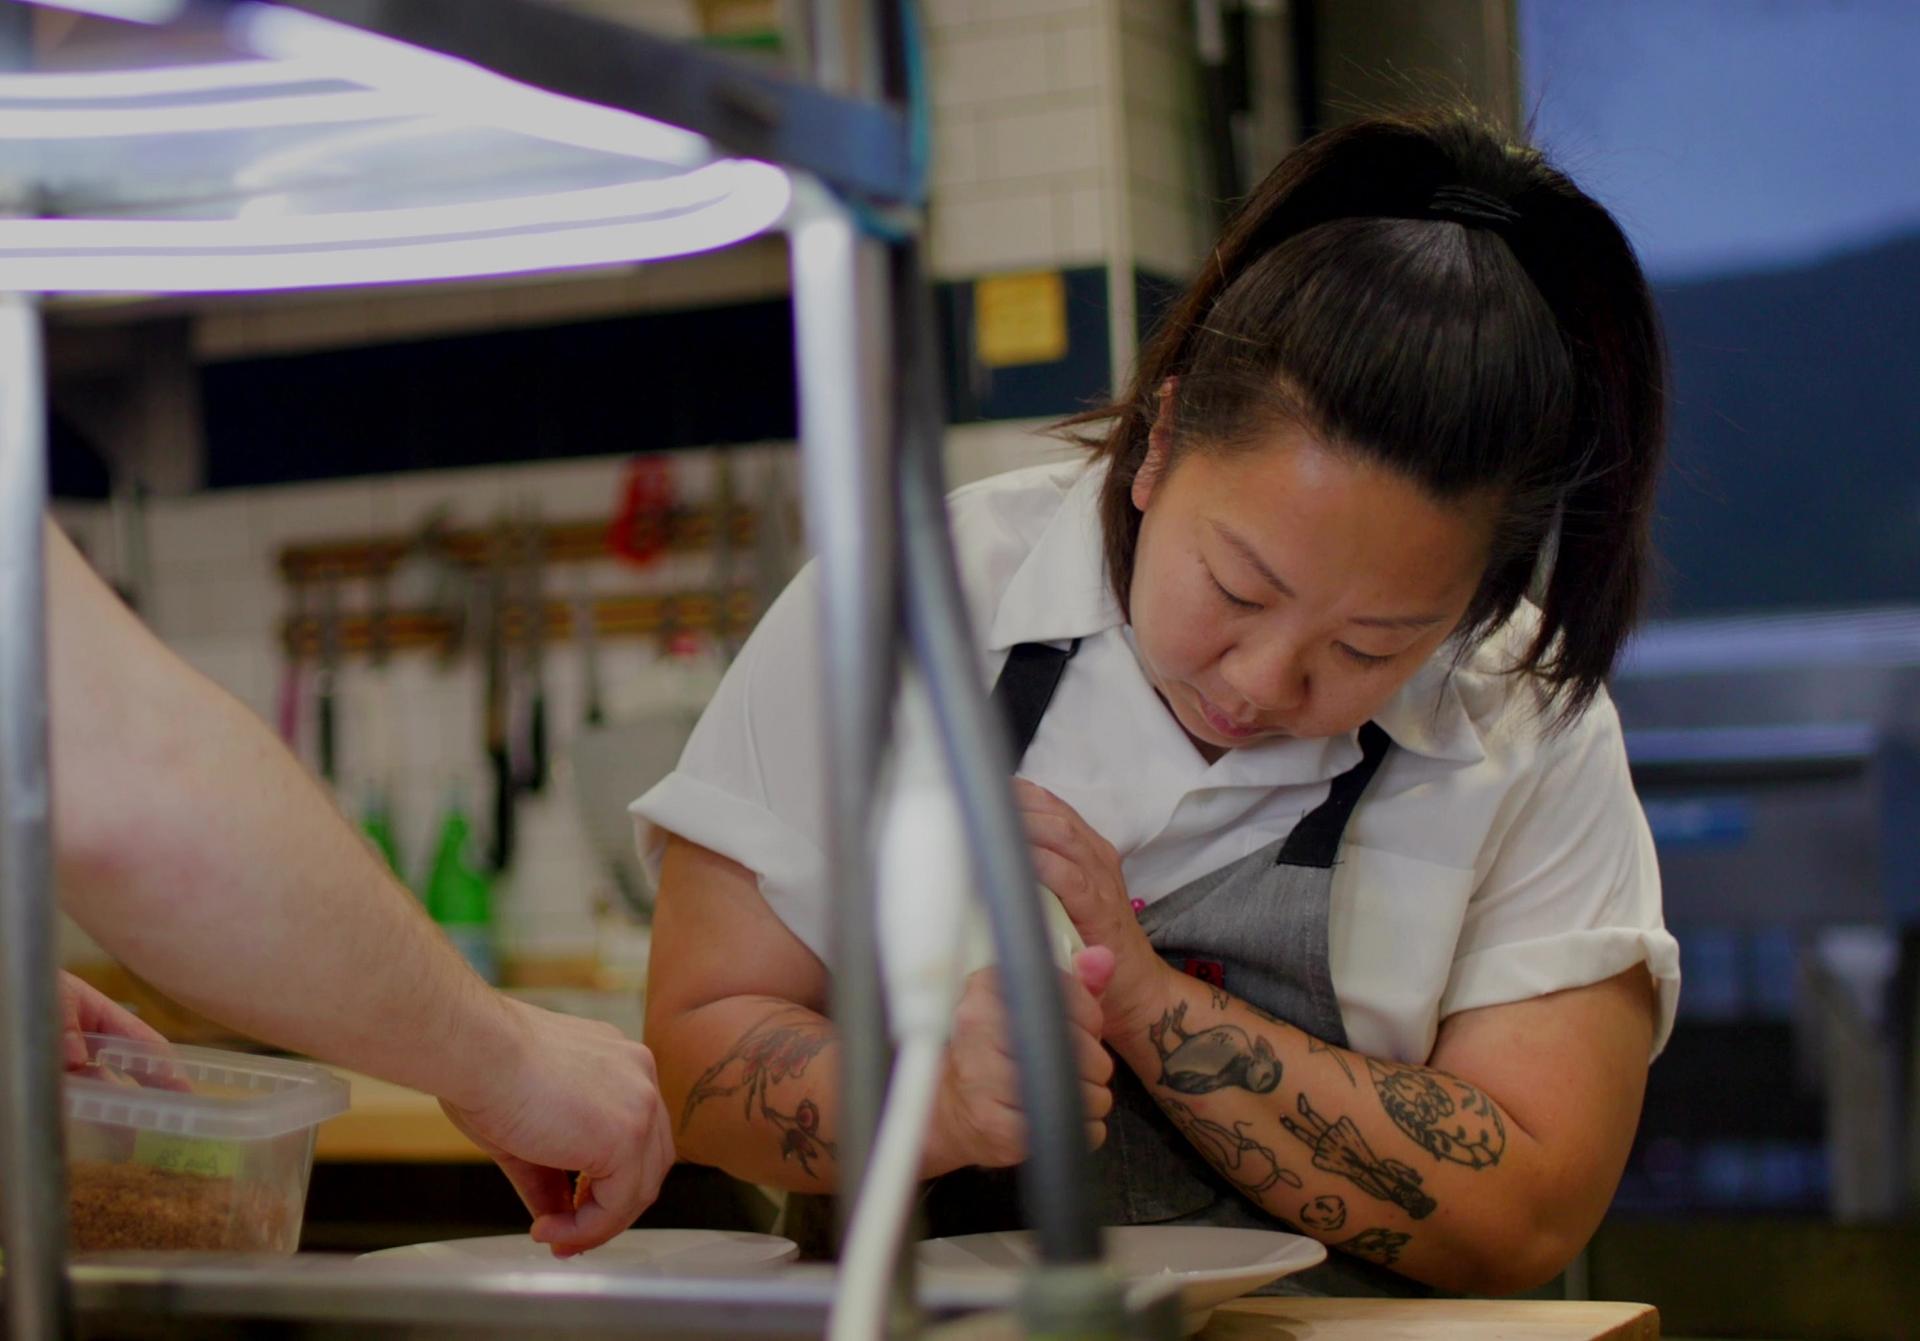 Celeste Mah, acclaimed Pastry Chef